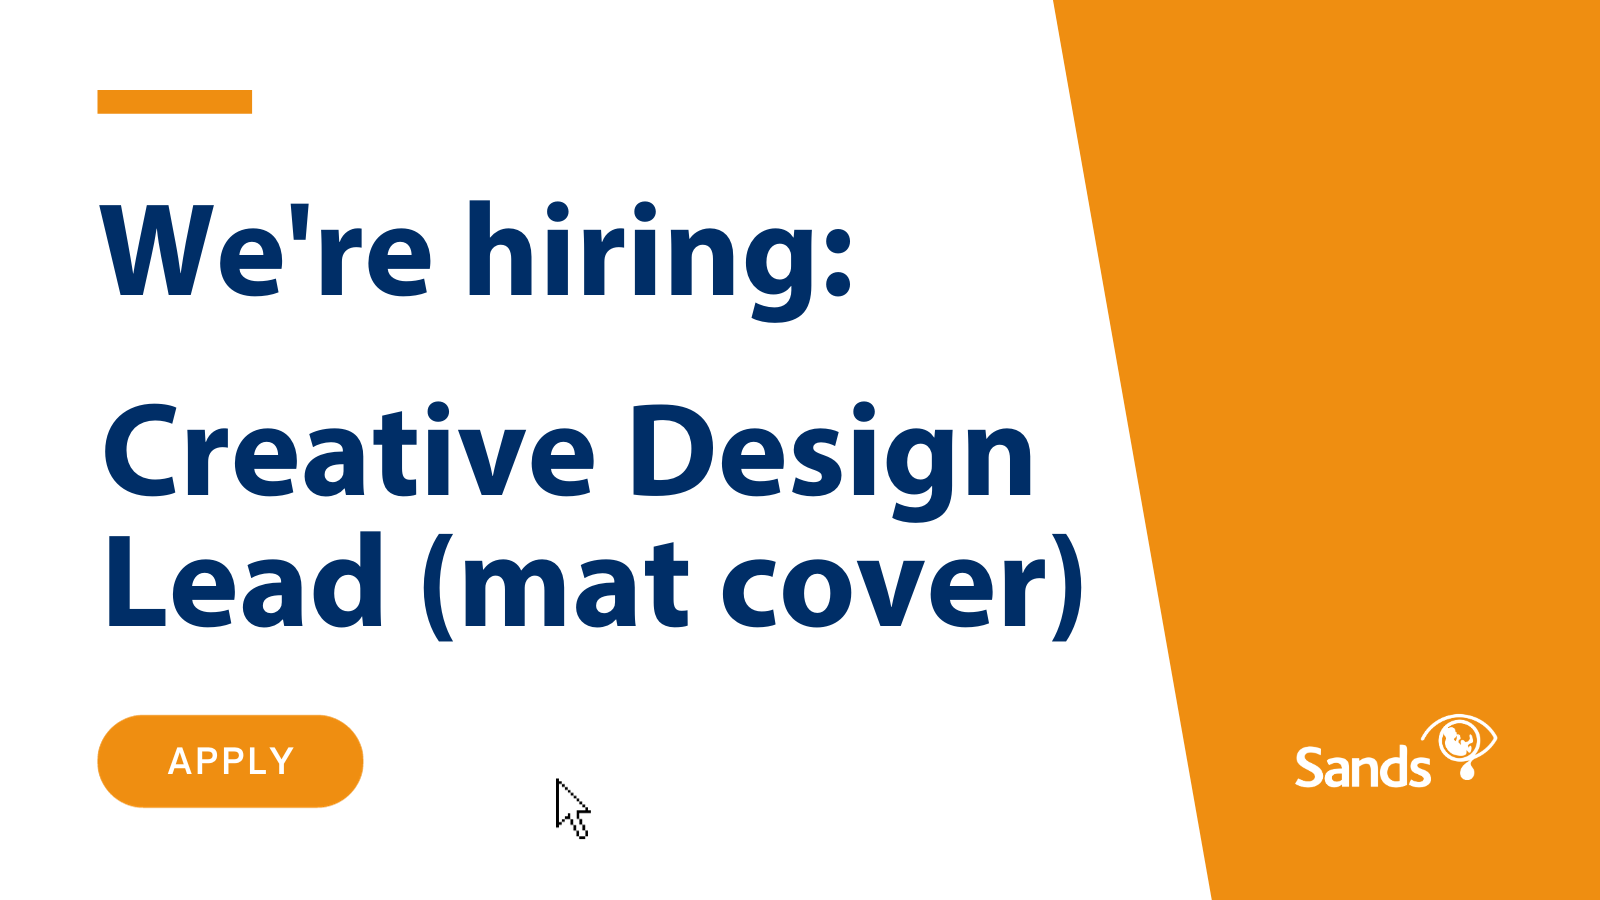 We are hiring Creative Design Lead (maternity cover)